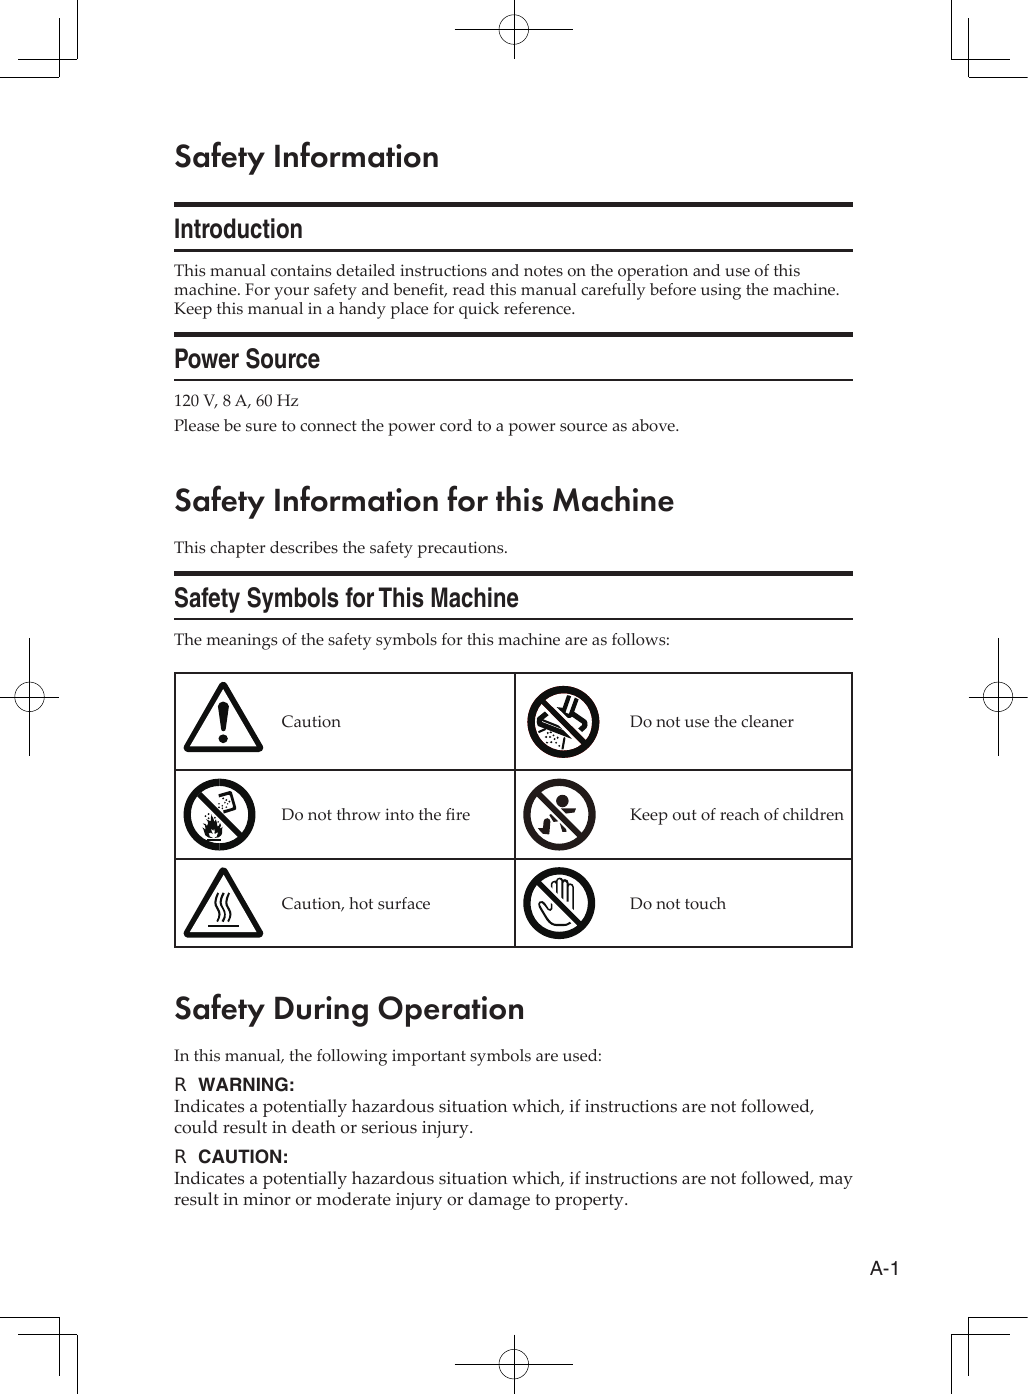 A-1Safety InformationIntroductionThis manual contains detailed instructions and notes on the operation and use of this machine. For your safety and benet, read this manual carefully before using the machine. Keep this manual in a handy place for quick reference.Power Source120 V, 8 A, 60 HzPlease be sure to connect the power cord to a power source as above.Safety Information for this MachineThis chapter describes the safety precautions.Safety Symbols for This MachineThe meanings of the safety symbols for this machine are as follows:Caution Do not use the cleanerDo not throw into the re Keep out of reach of childrenCaution, hot surface Do not touchSafety During OperationIn this manual, the following important symbols are used:WARNING: RIndicates a potentially hazardous situation which, if instructions are not followed, could result in death or serious injury.CAUTION: RIndicates a potentially hazardous situation which, if instructions are not followed, may result in minor or moderate injury or damage to property.